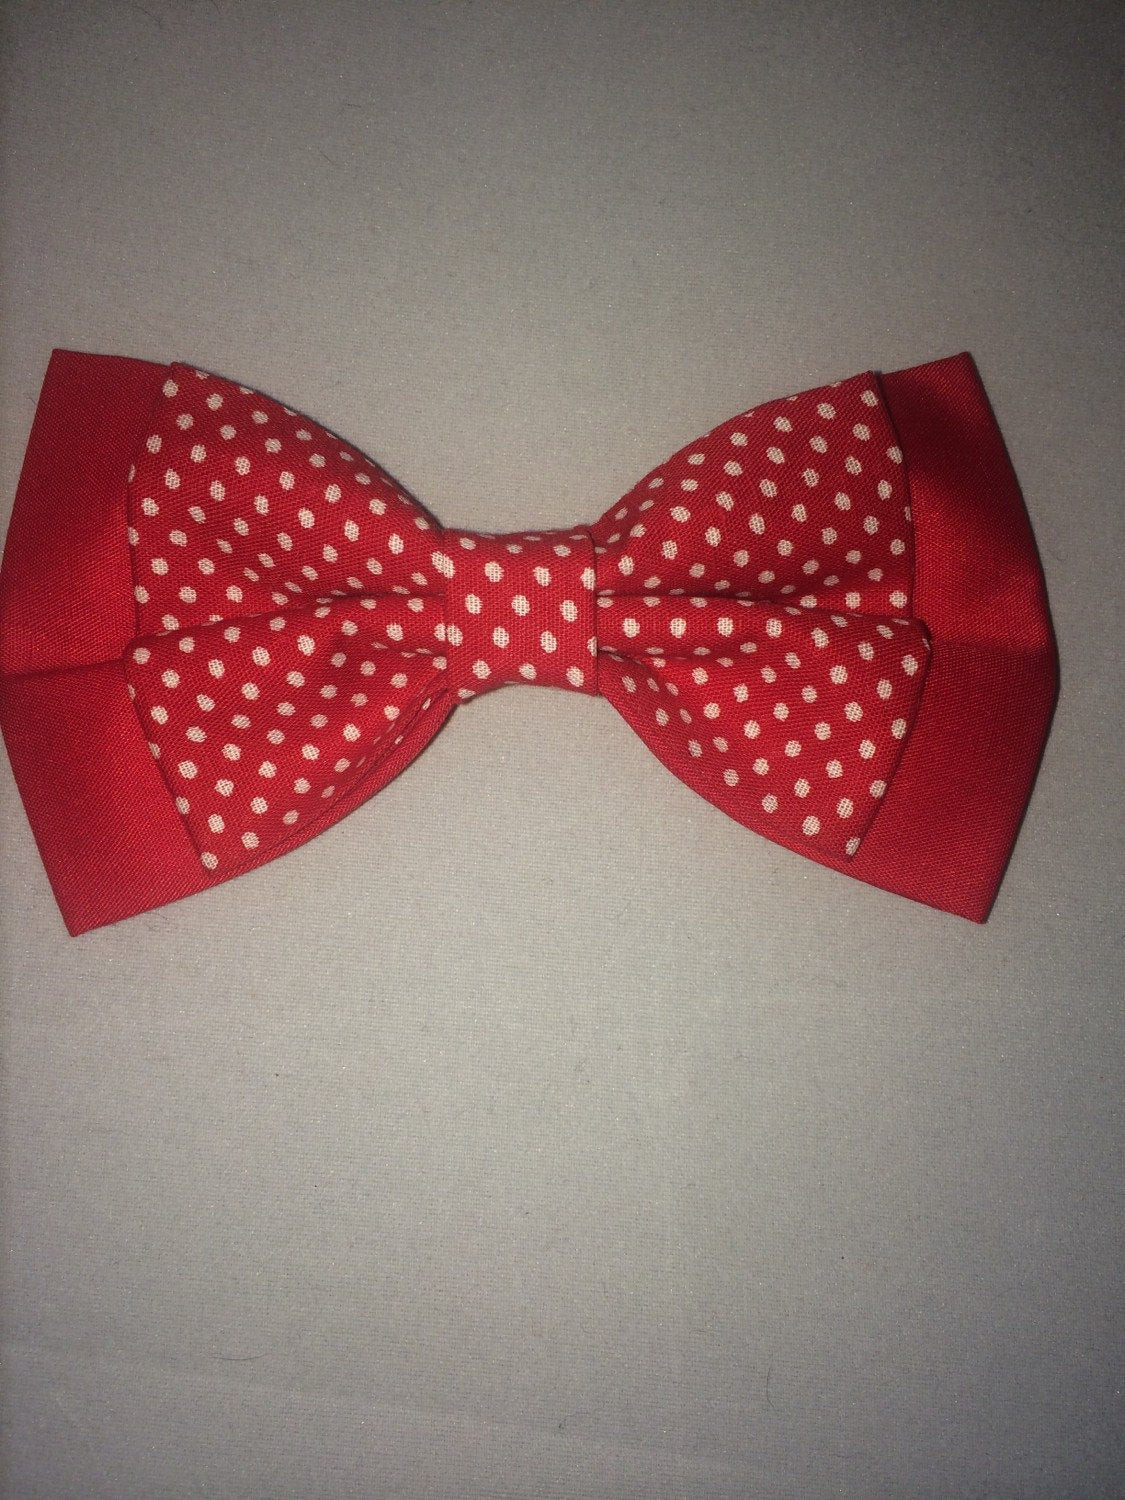 DIY Double Dog Tie Out
 Handmade dog bow tie double layered red and white polka